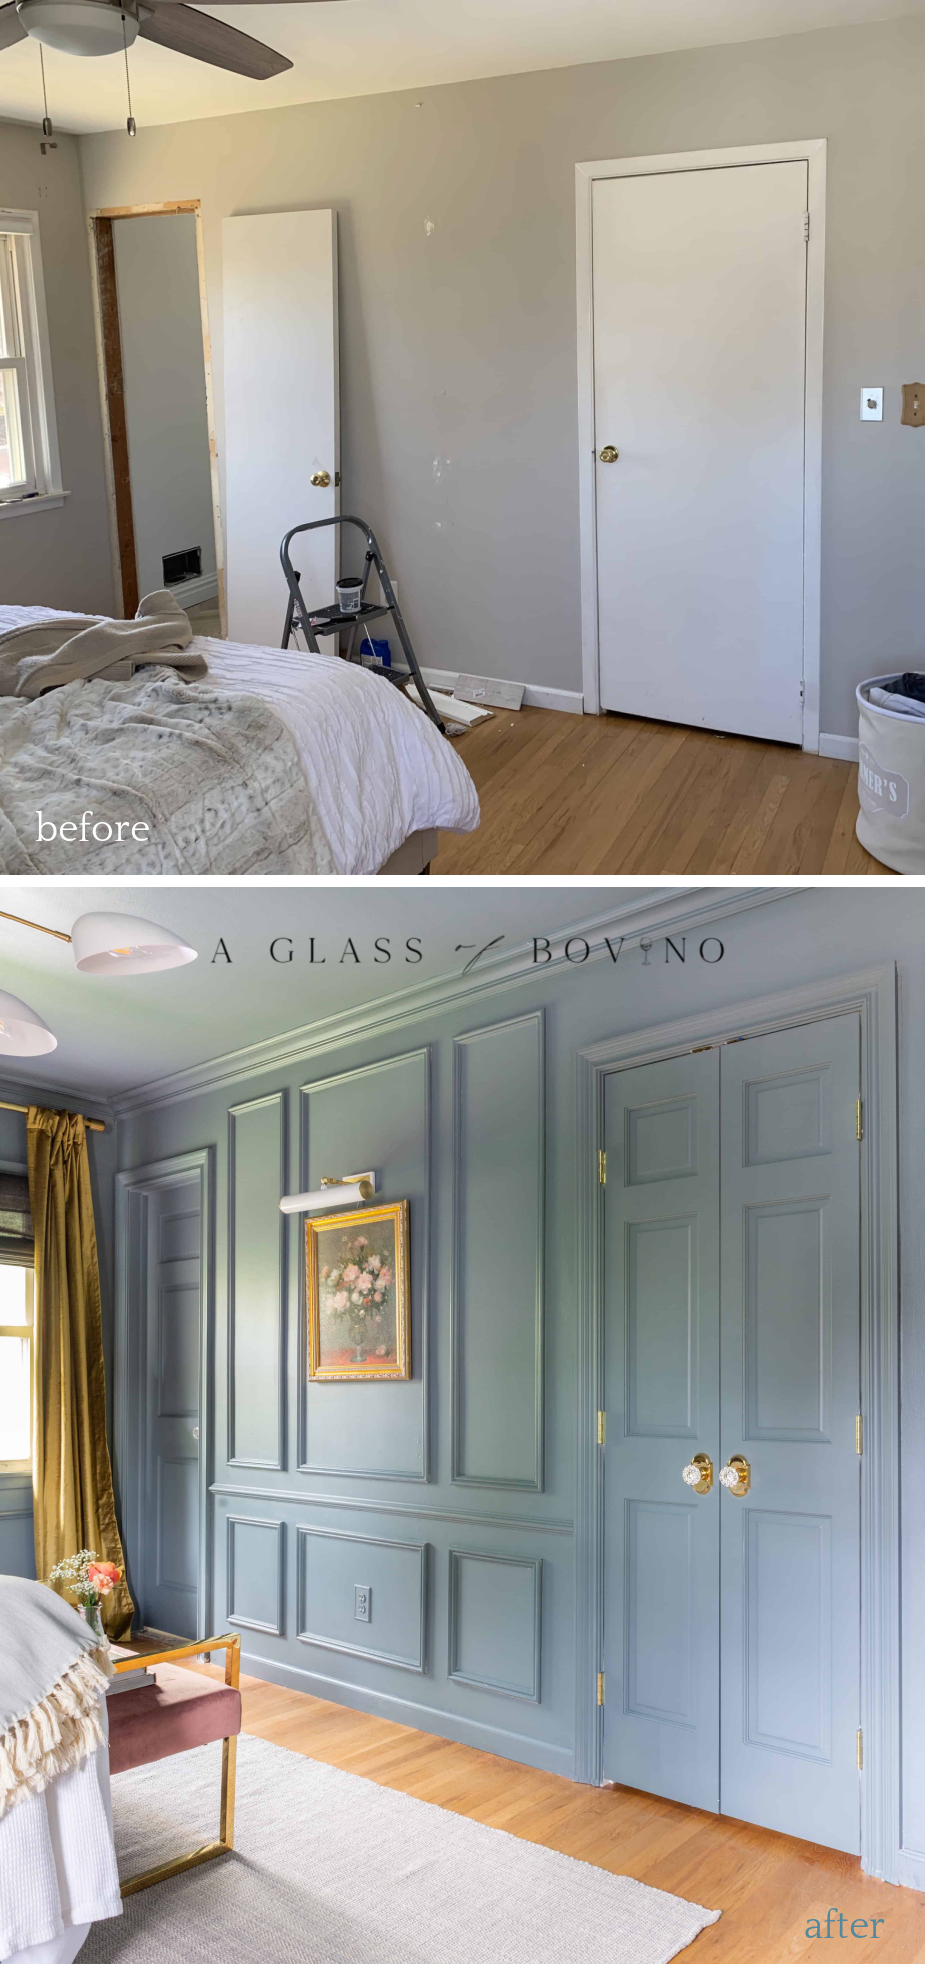 before and after a glass of bovino - master bedroom - not boring bedroom